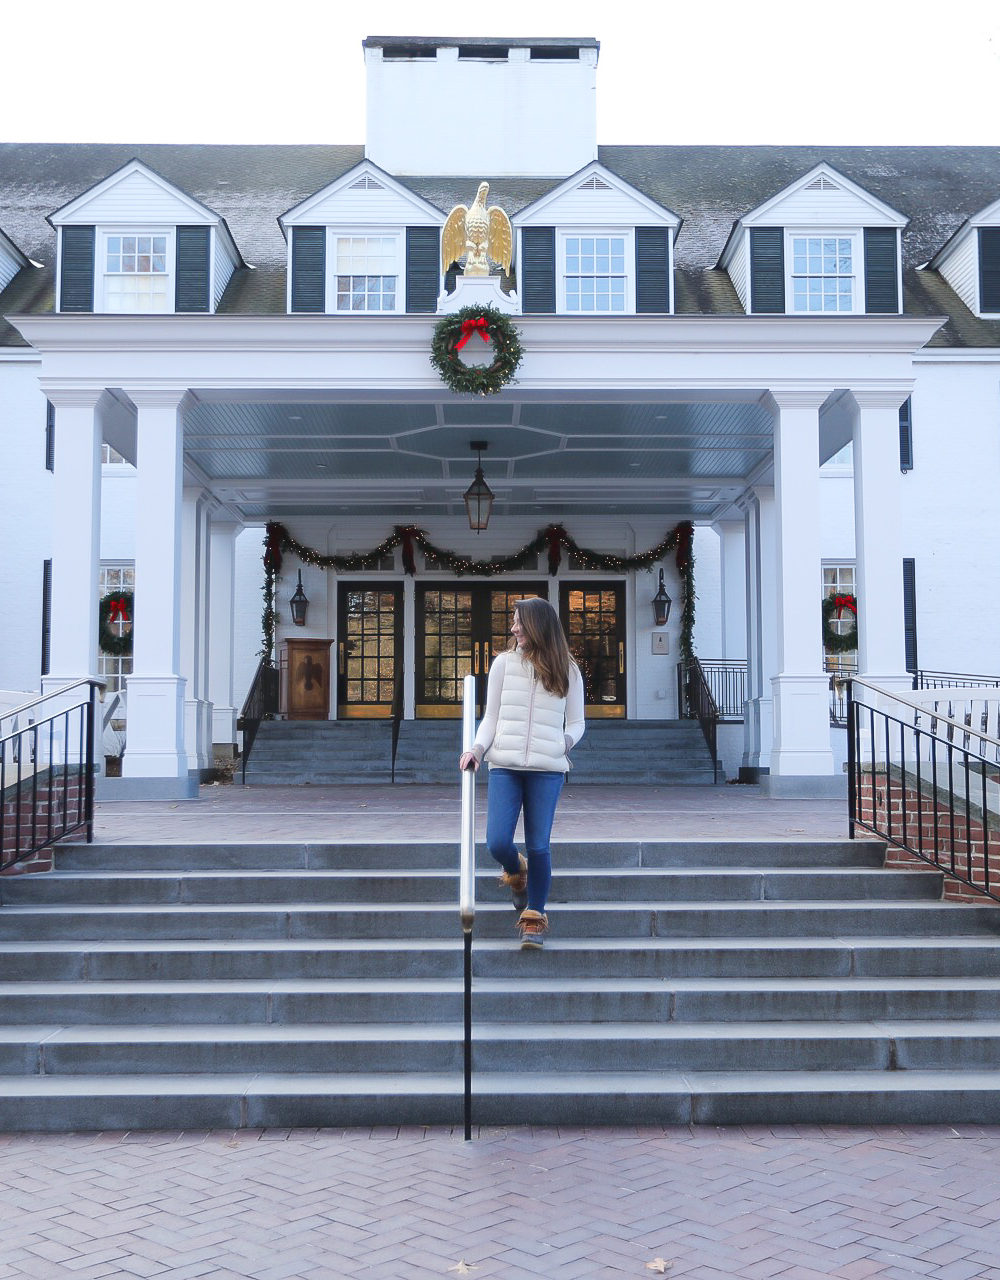 Spend the Holidays at the Woodstock Inn | Woodstock, Vermont